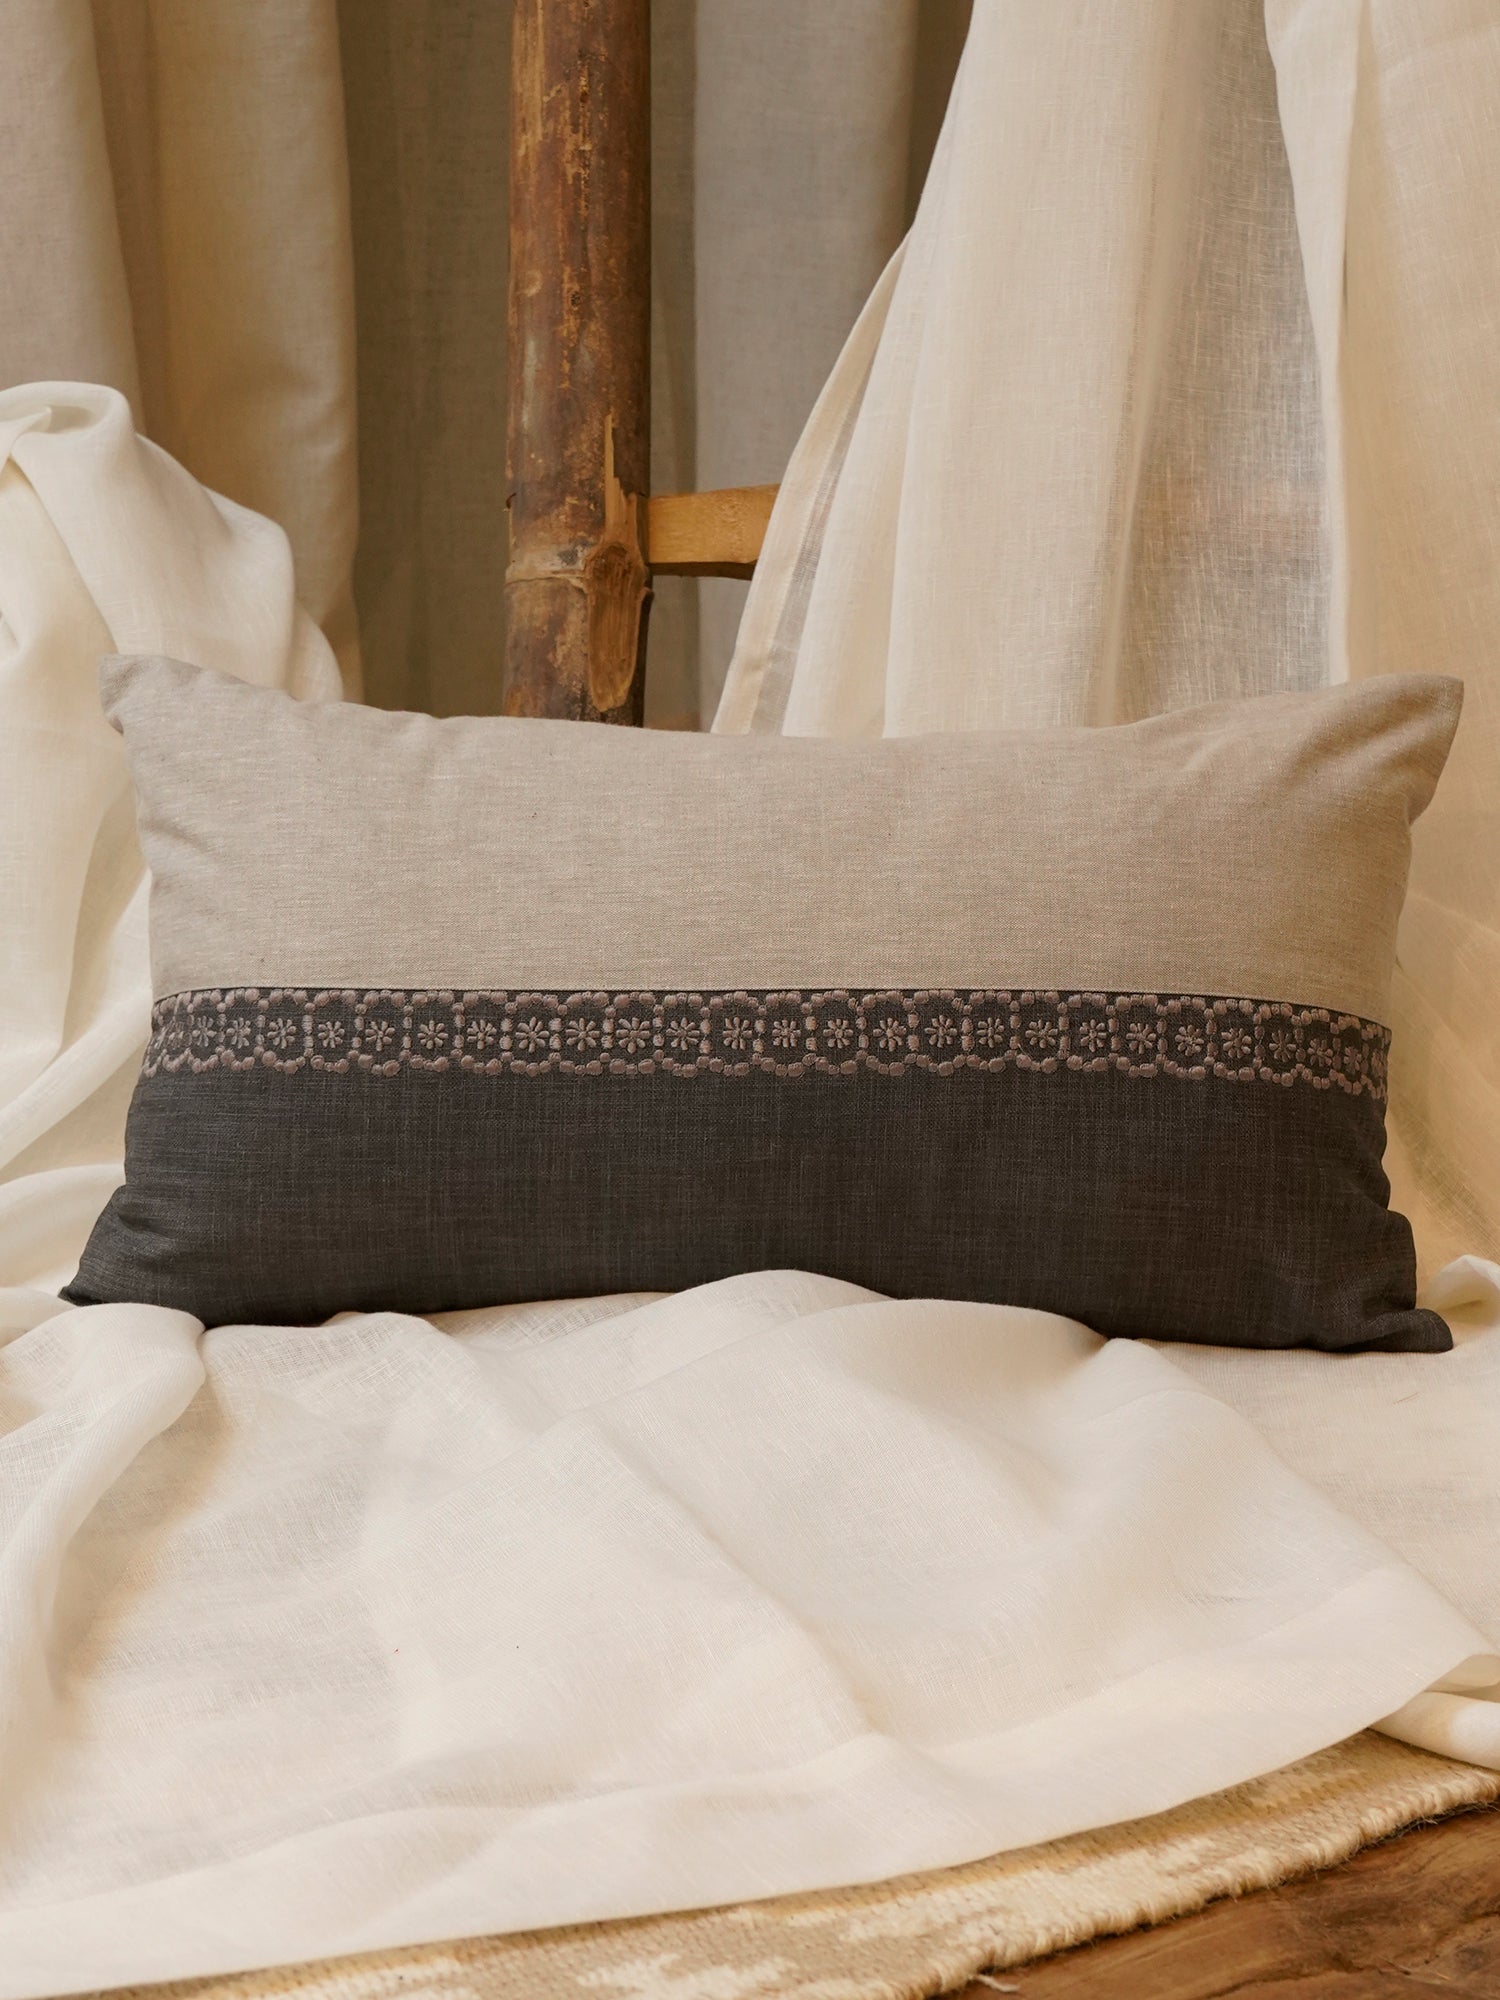 Cushion Cover Cotton Blend Patchwork with Embroidery Grey - 12" X 22"